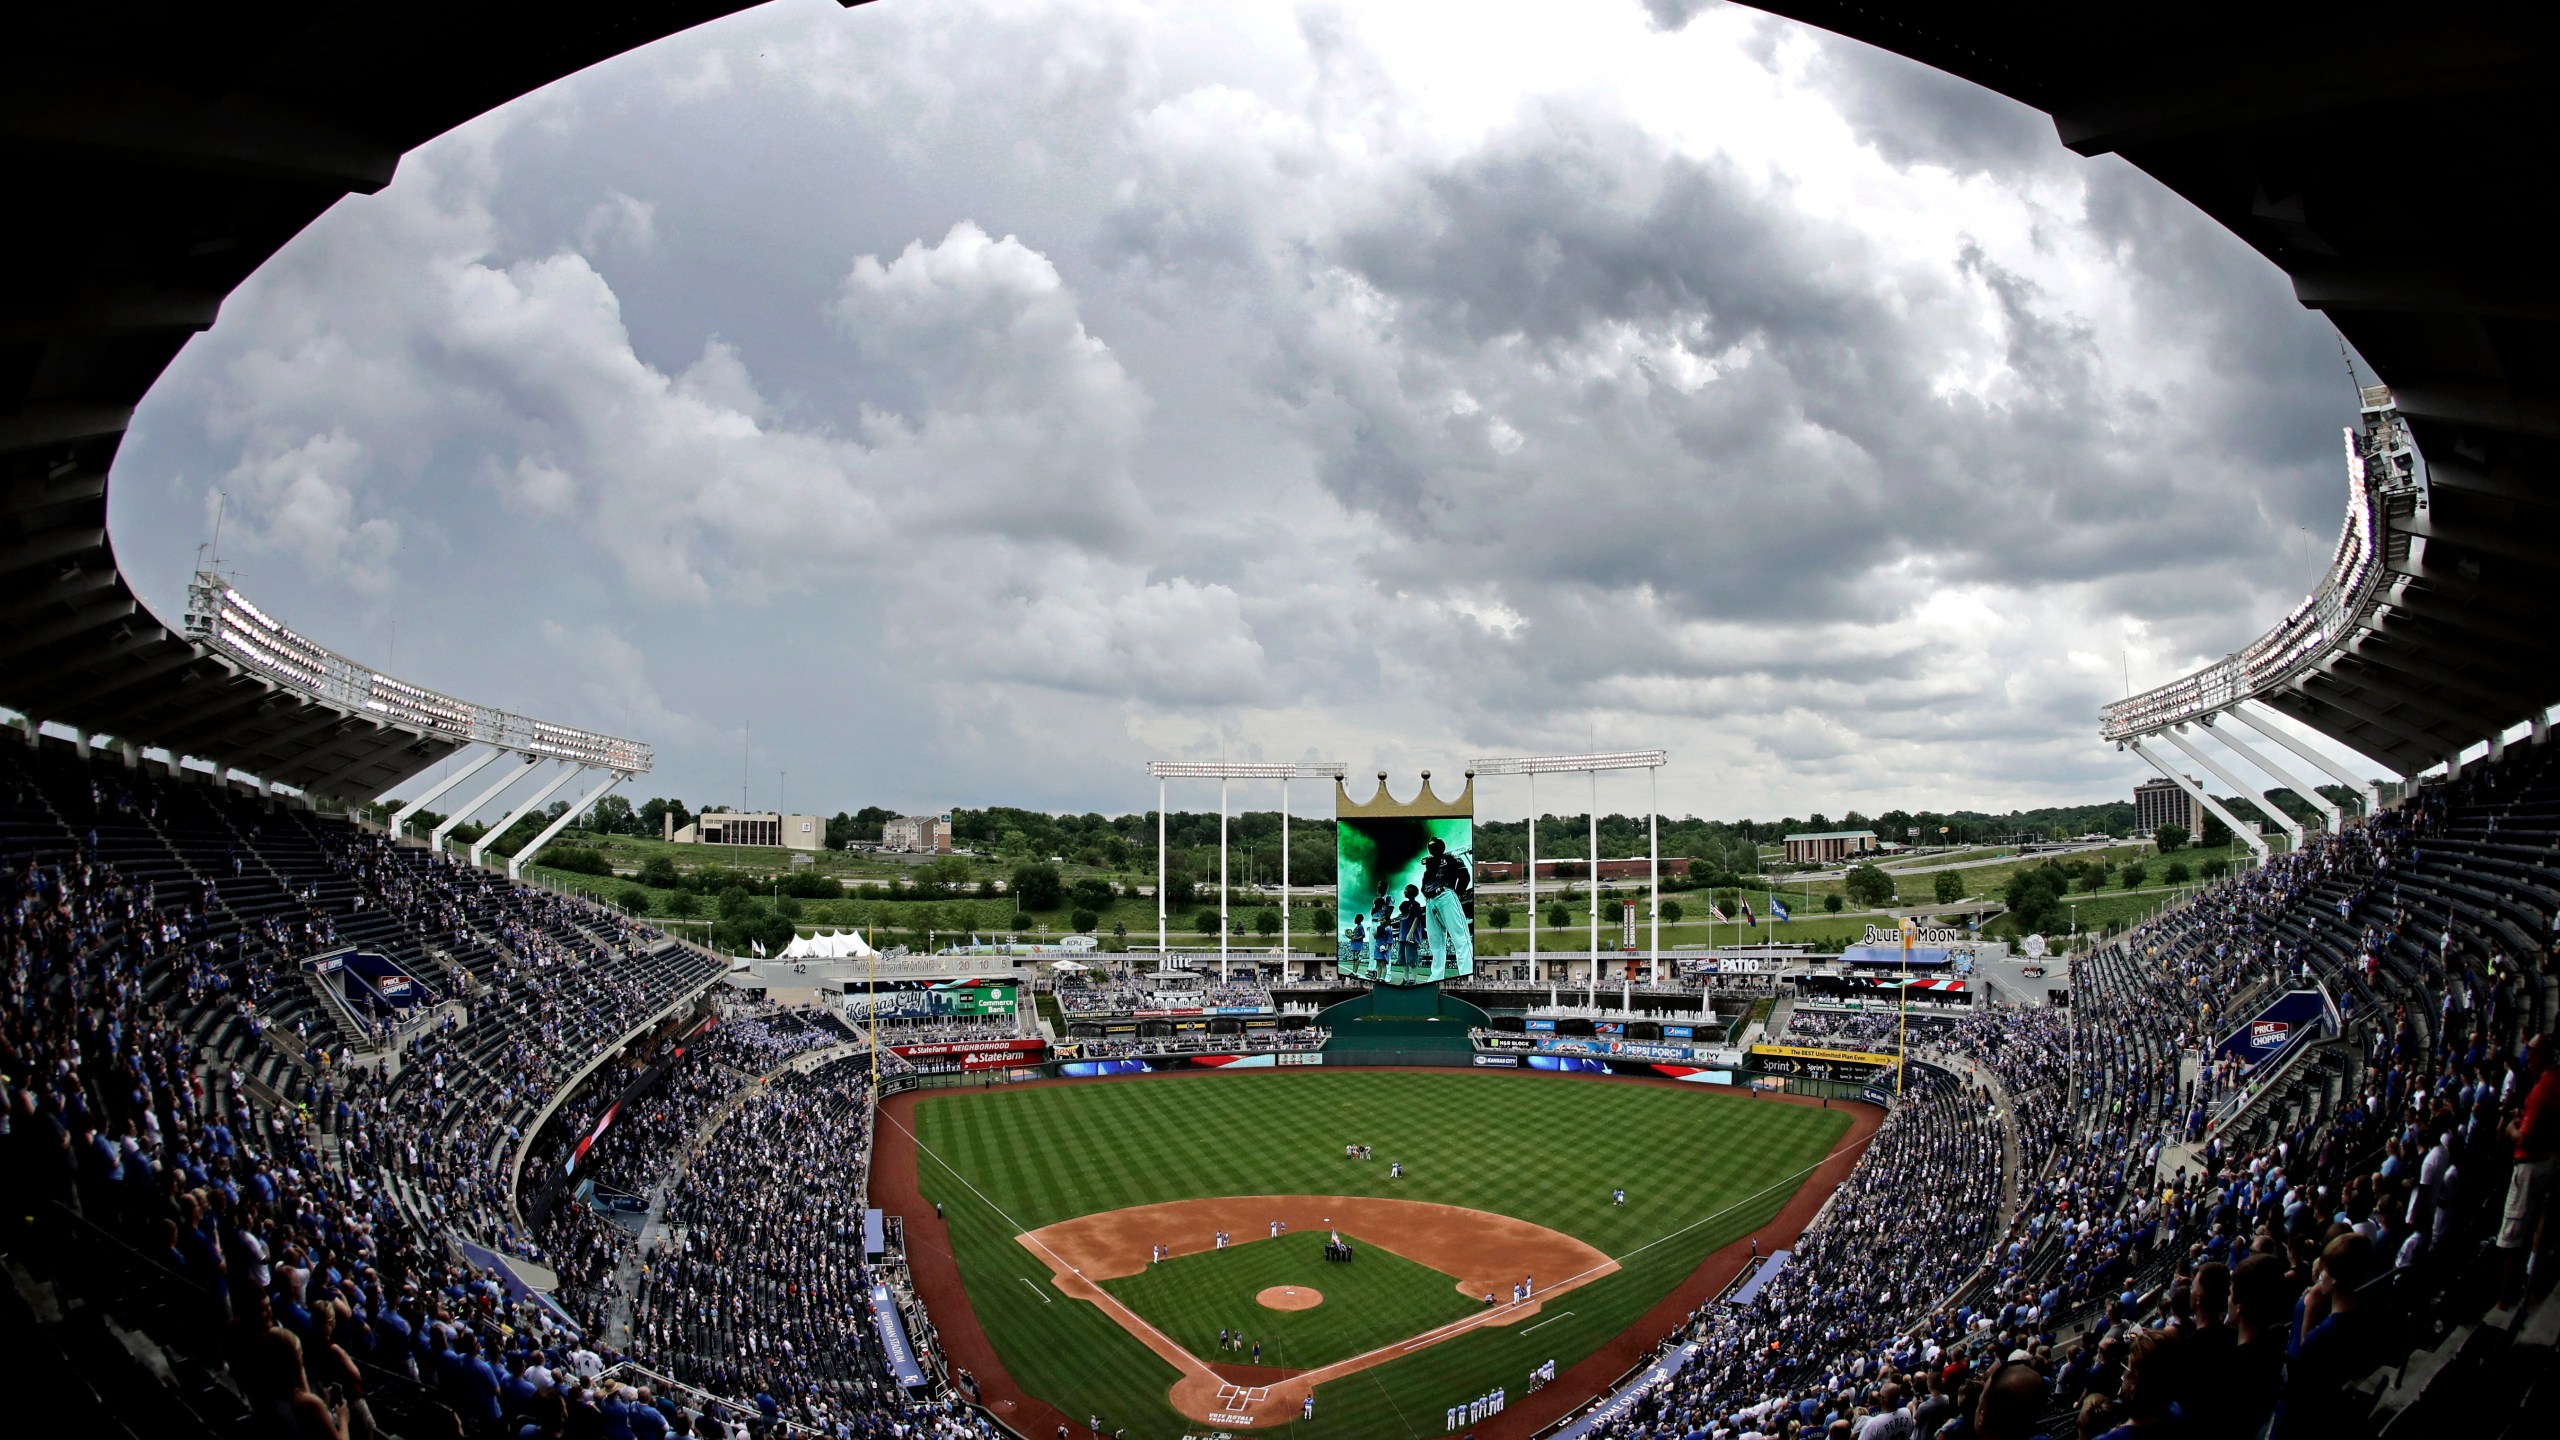 FILE - Clouds gather over Kauffman Stadium before a baseball game between the Kansas City Royals and the Cleveland Indians, Sunday, June 4, 2017, in Kansas City, Mo. Voter rejection of a stadium sales tax plan for the Kansas City Royals and Chiefs has raised questions about what happens next. (AP Photo/Charlie Riedel, File)